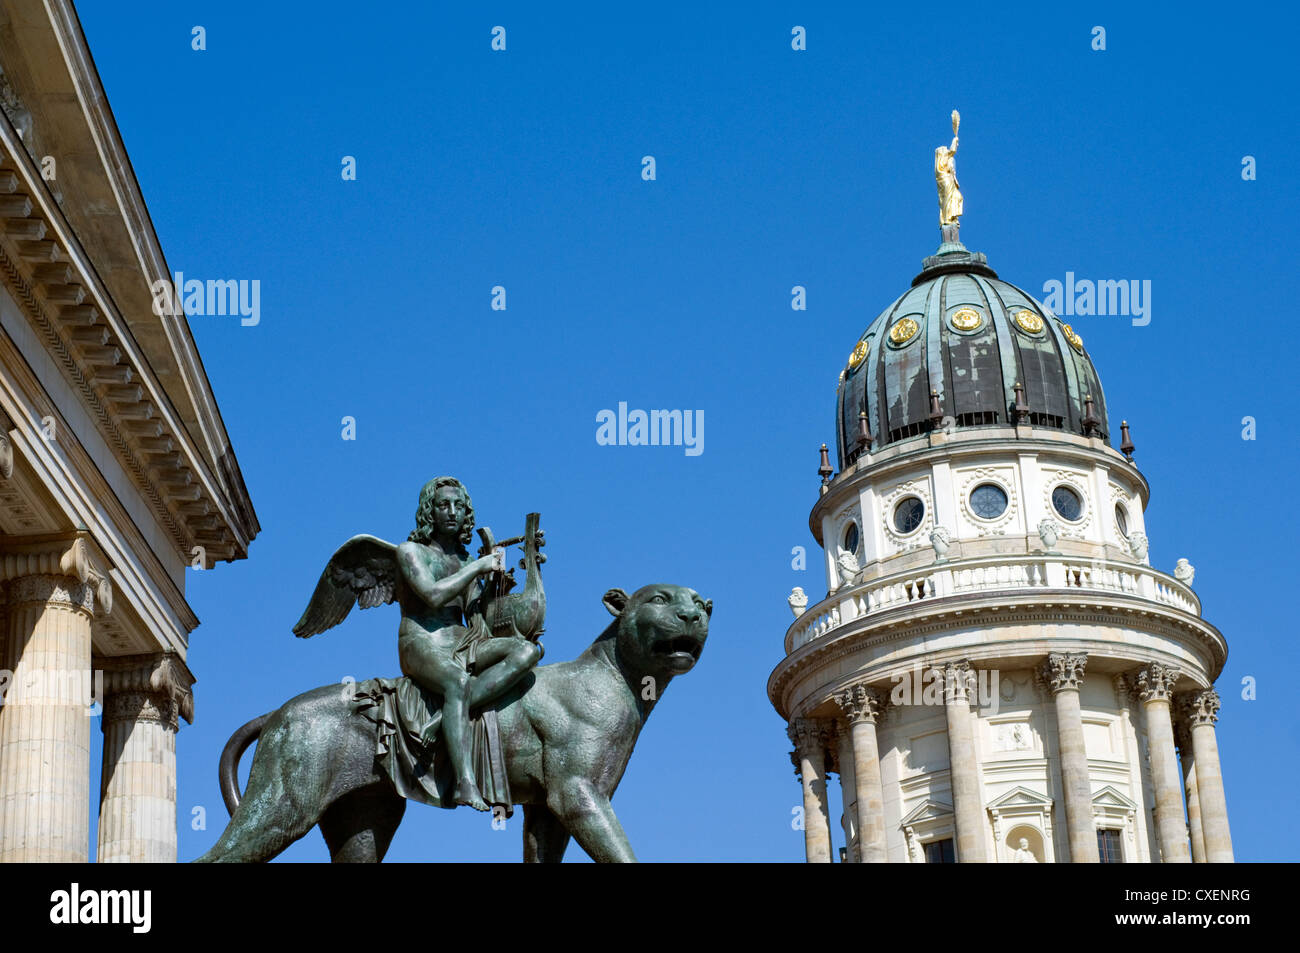 Dome of the French Cathedral on the Gendarmenmarkt in Berlin, Germany, with the Konzerthaus concert hall on the left. Stock Photo